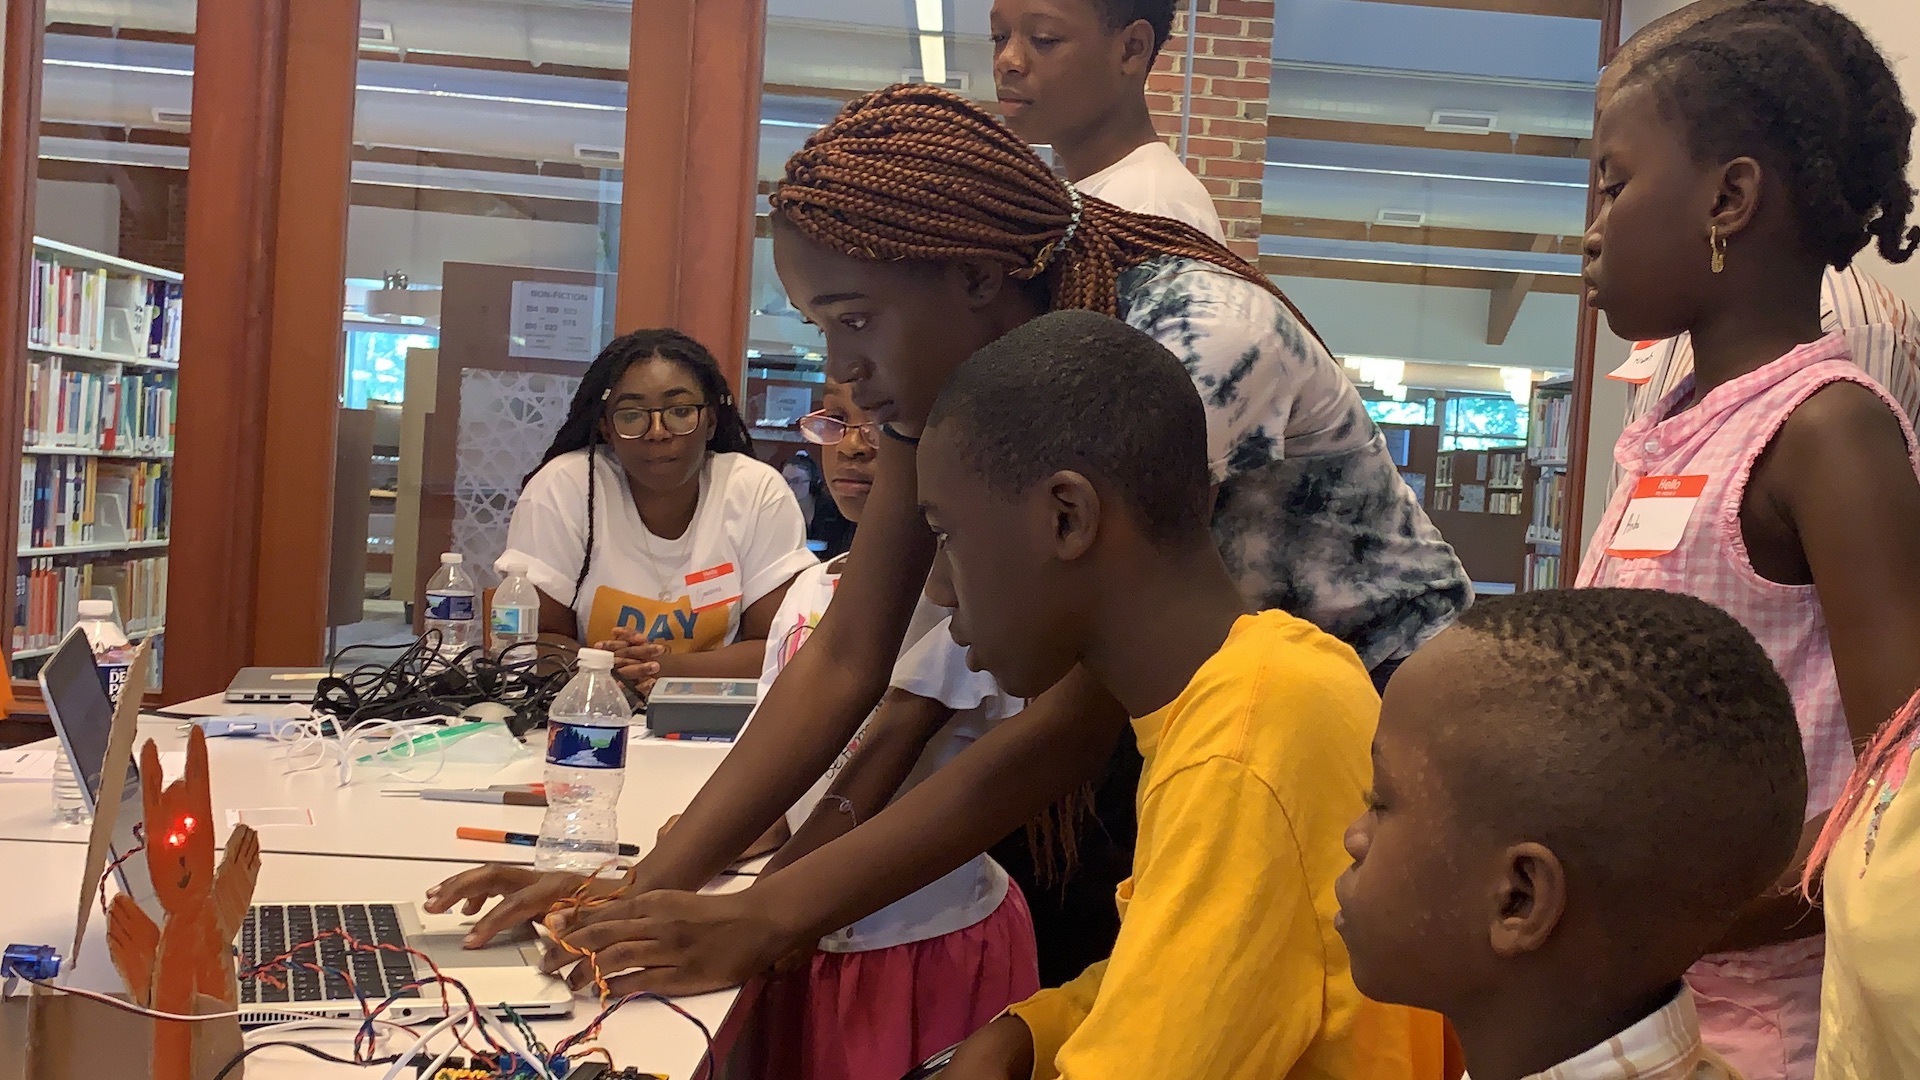 Building and Programing robot kits with Scratch